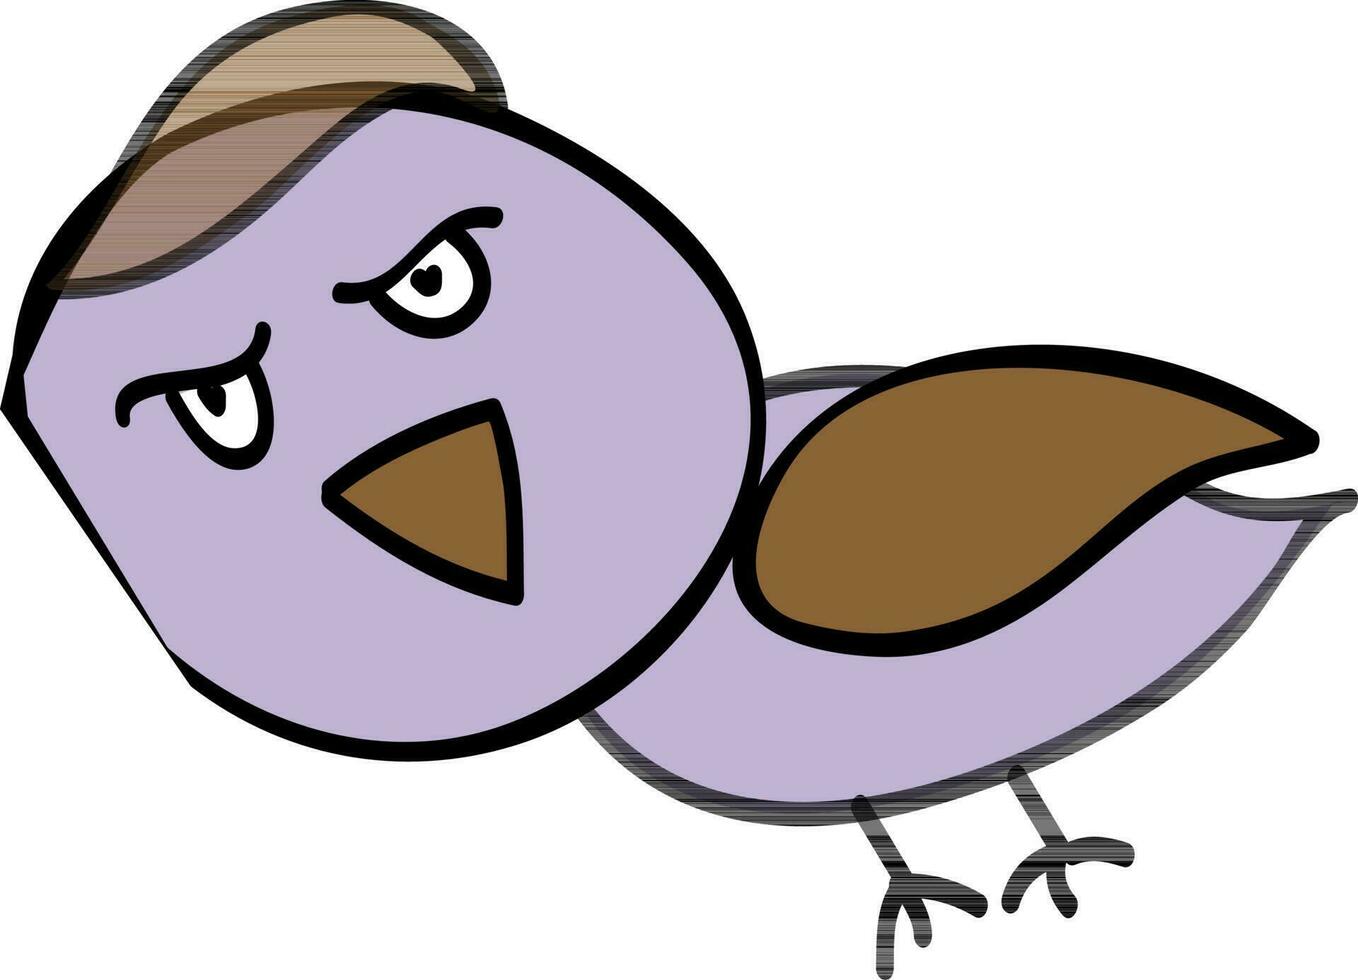 Doodle character of bird in angry pose. vector